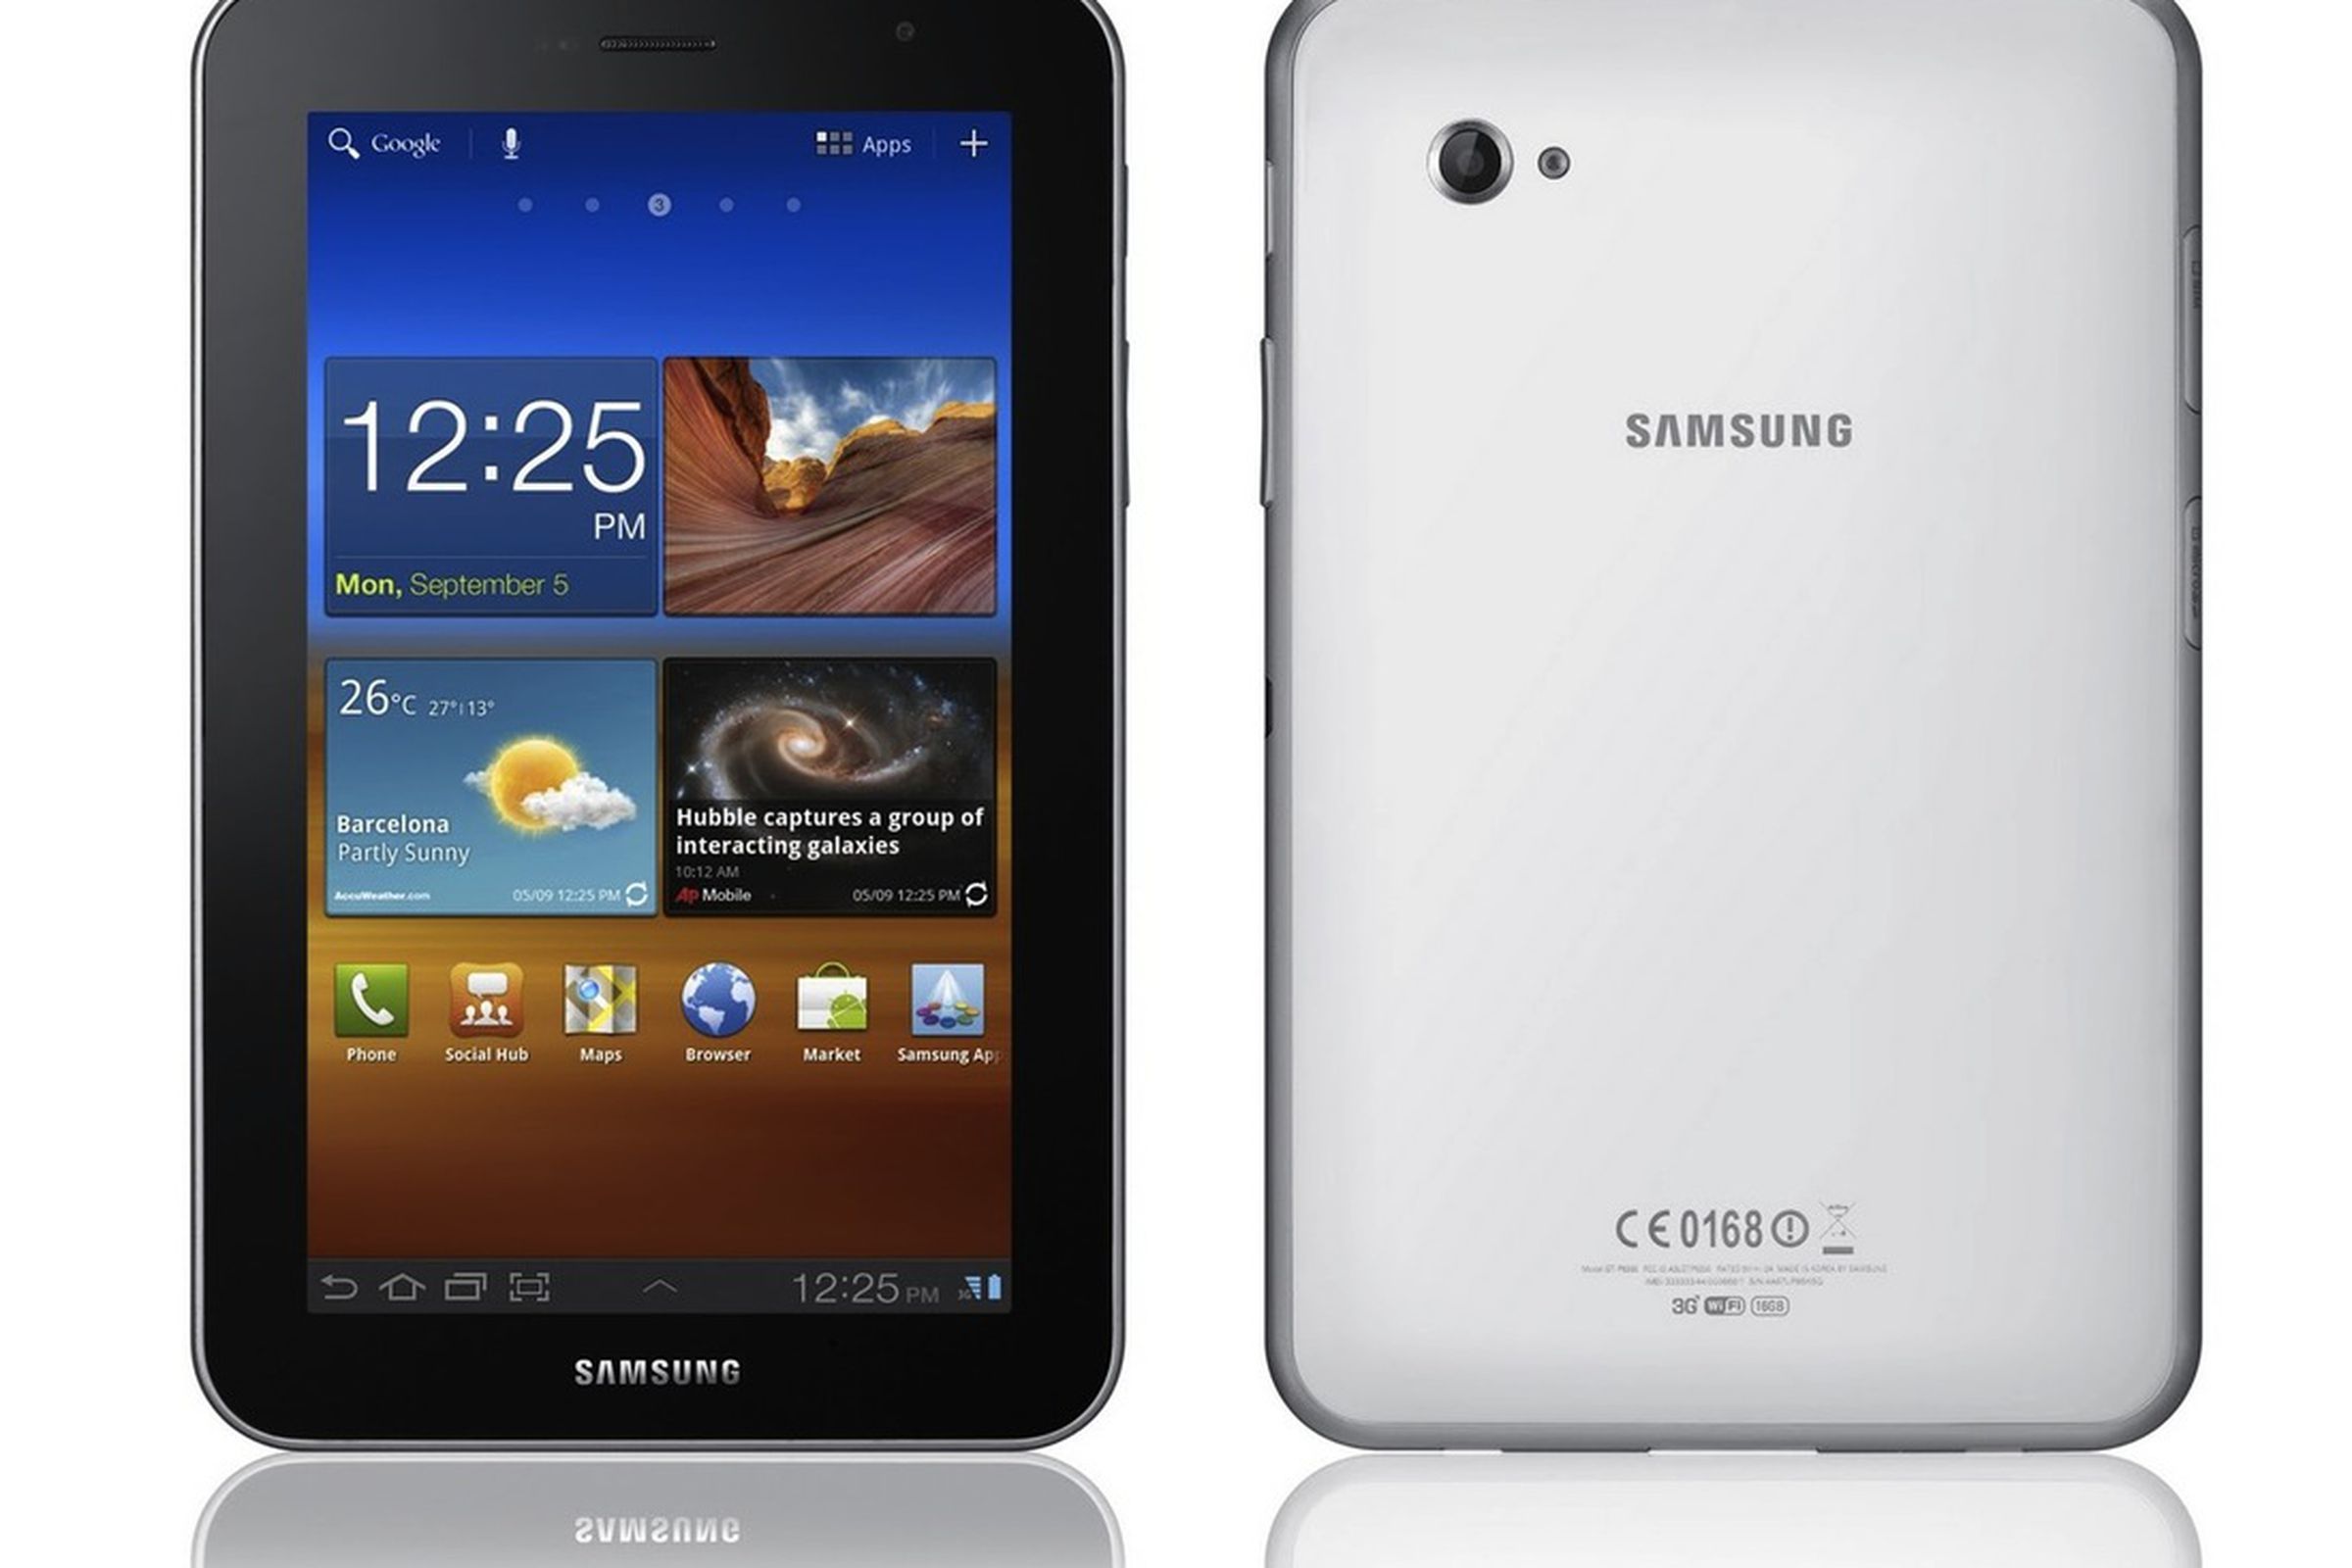 Galaxy Tab 7.0 Plus front and back